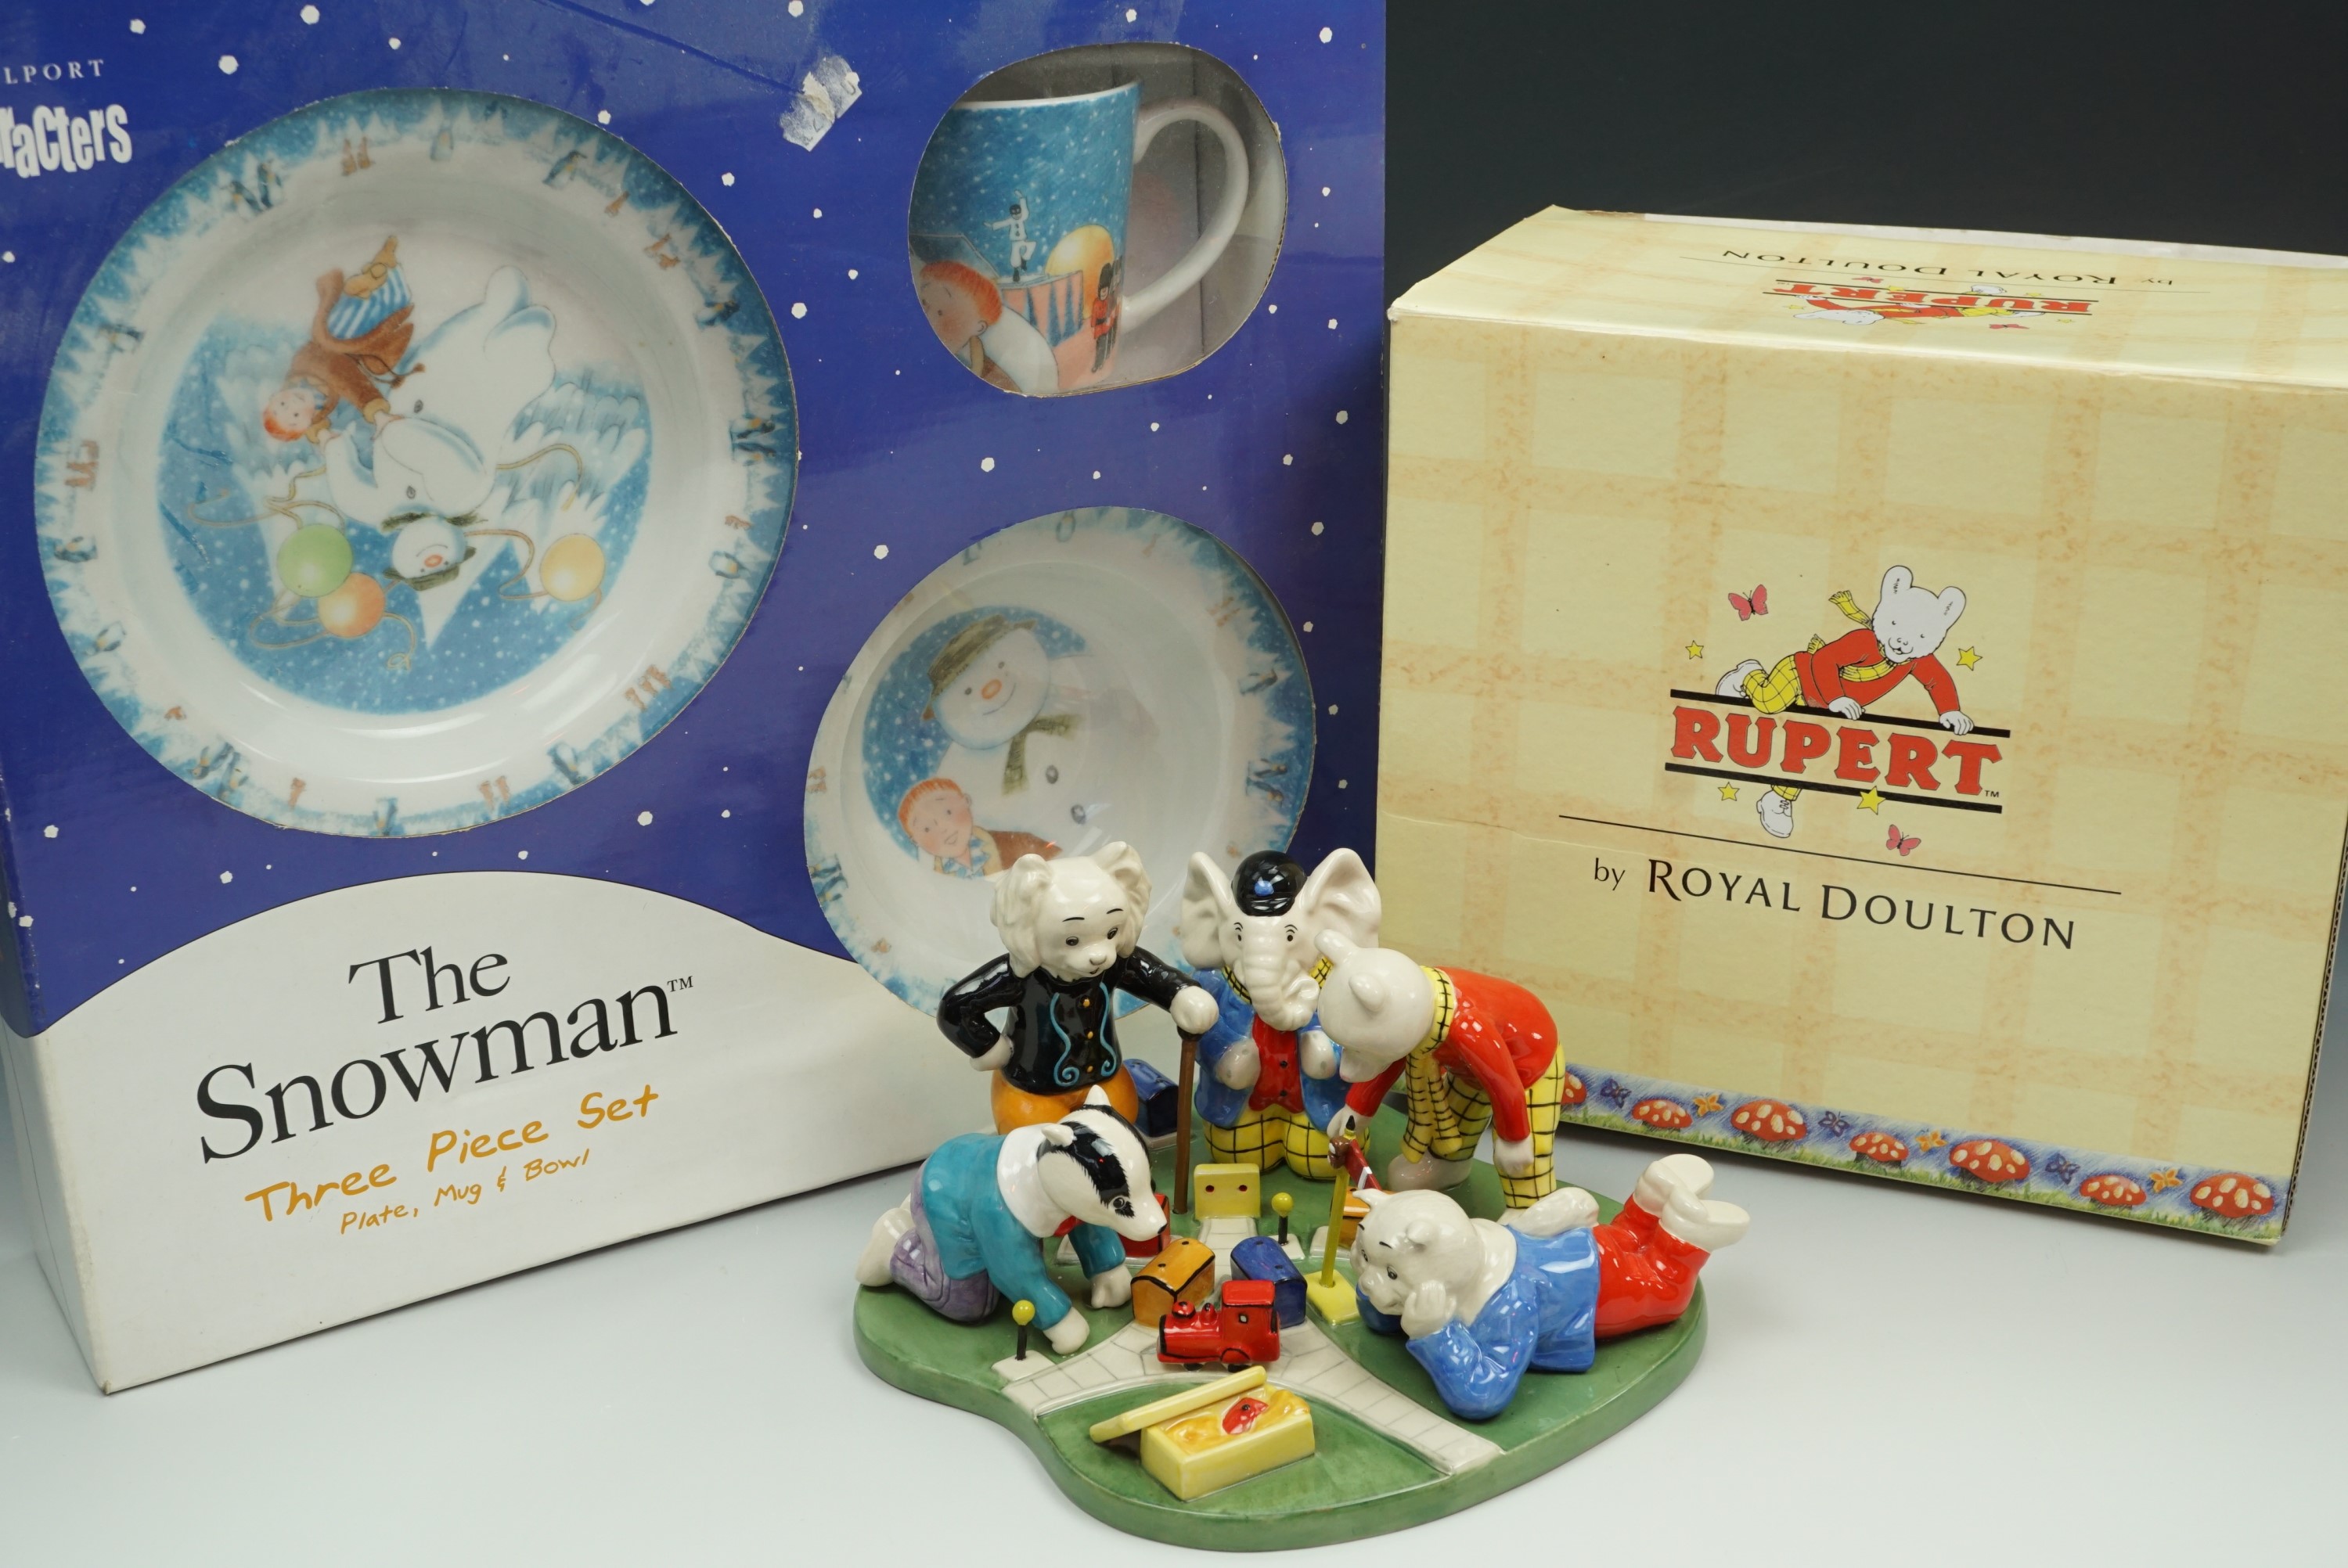 Royal Doulton boxed limited edition 'Rupert's Toy Railway', and a Coalport 'Characters' 'The